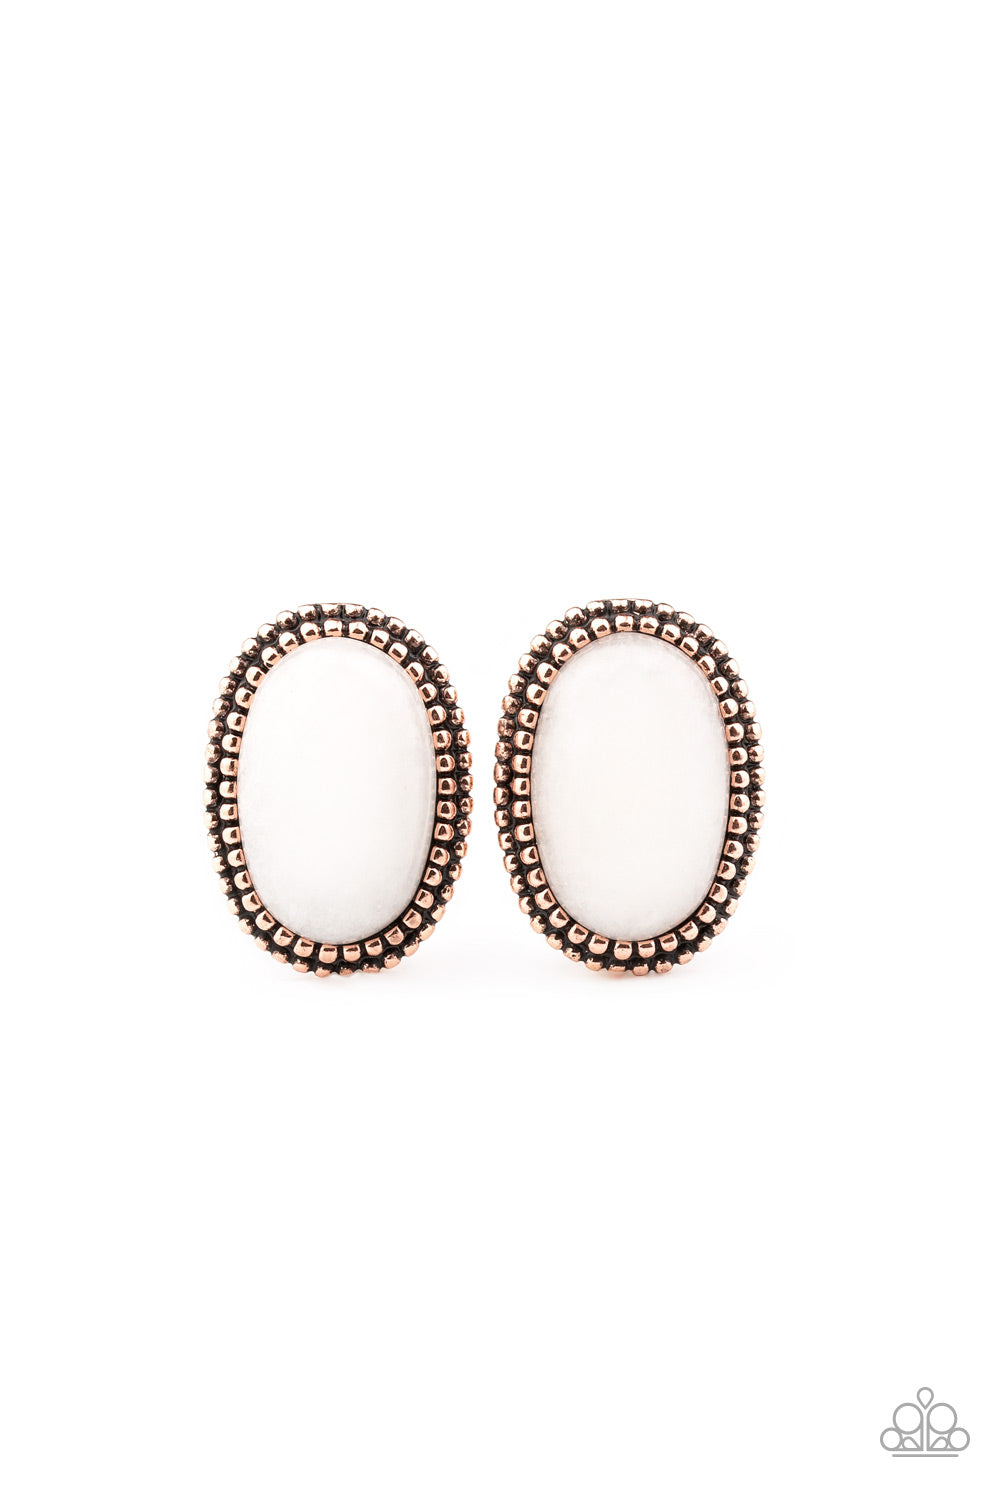 Shiny Sediment - Copper Fashion Post Earrings - Paparazzi Accessories - A studded copper frame spins around a glassy white stone, creating a whimsical frame. Earring attaches to a standard post fitting. Sold as one pair of post earrings.